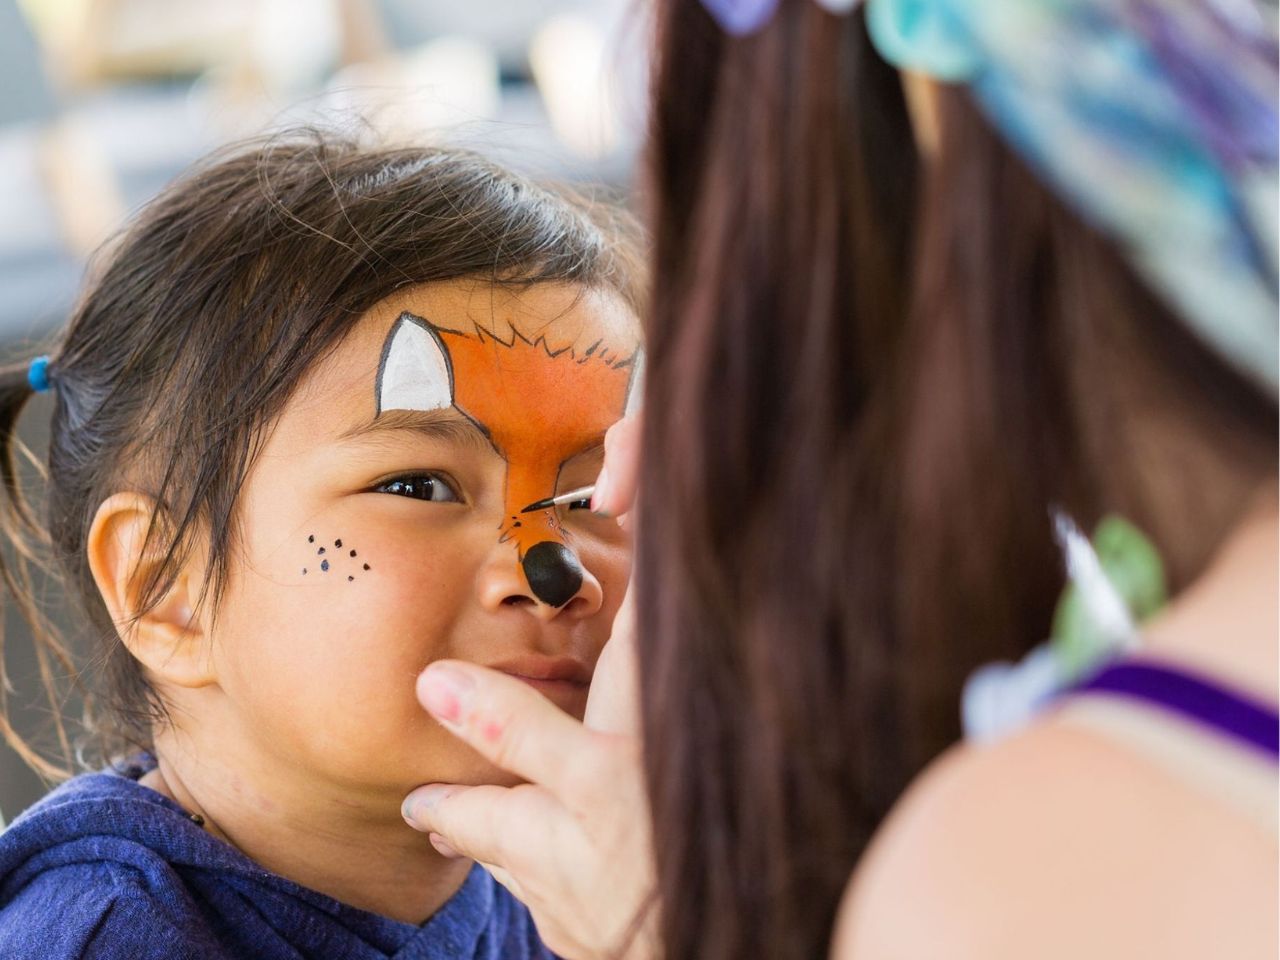 Allara, Eglinton community events, child getting their face painted.